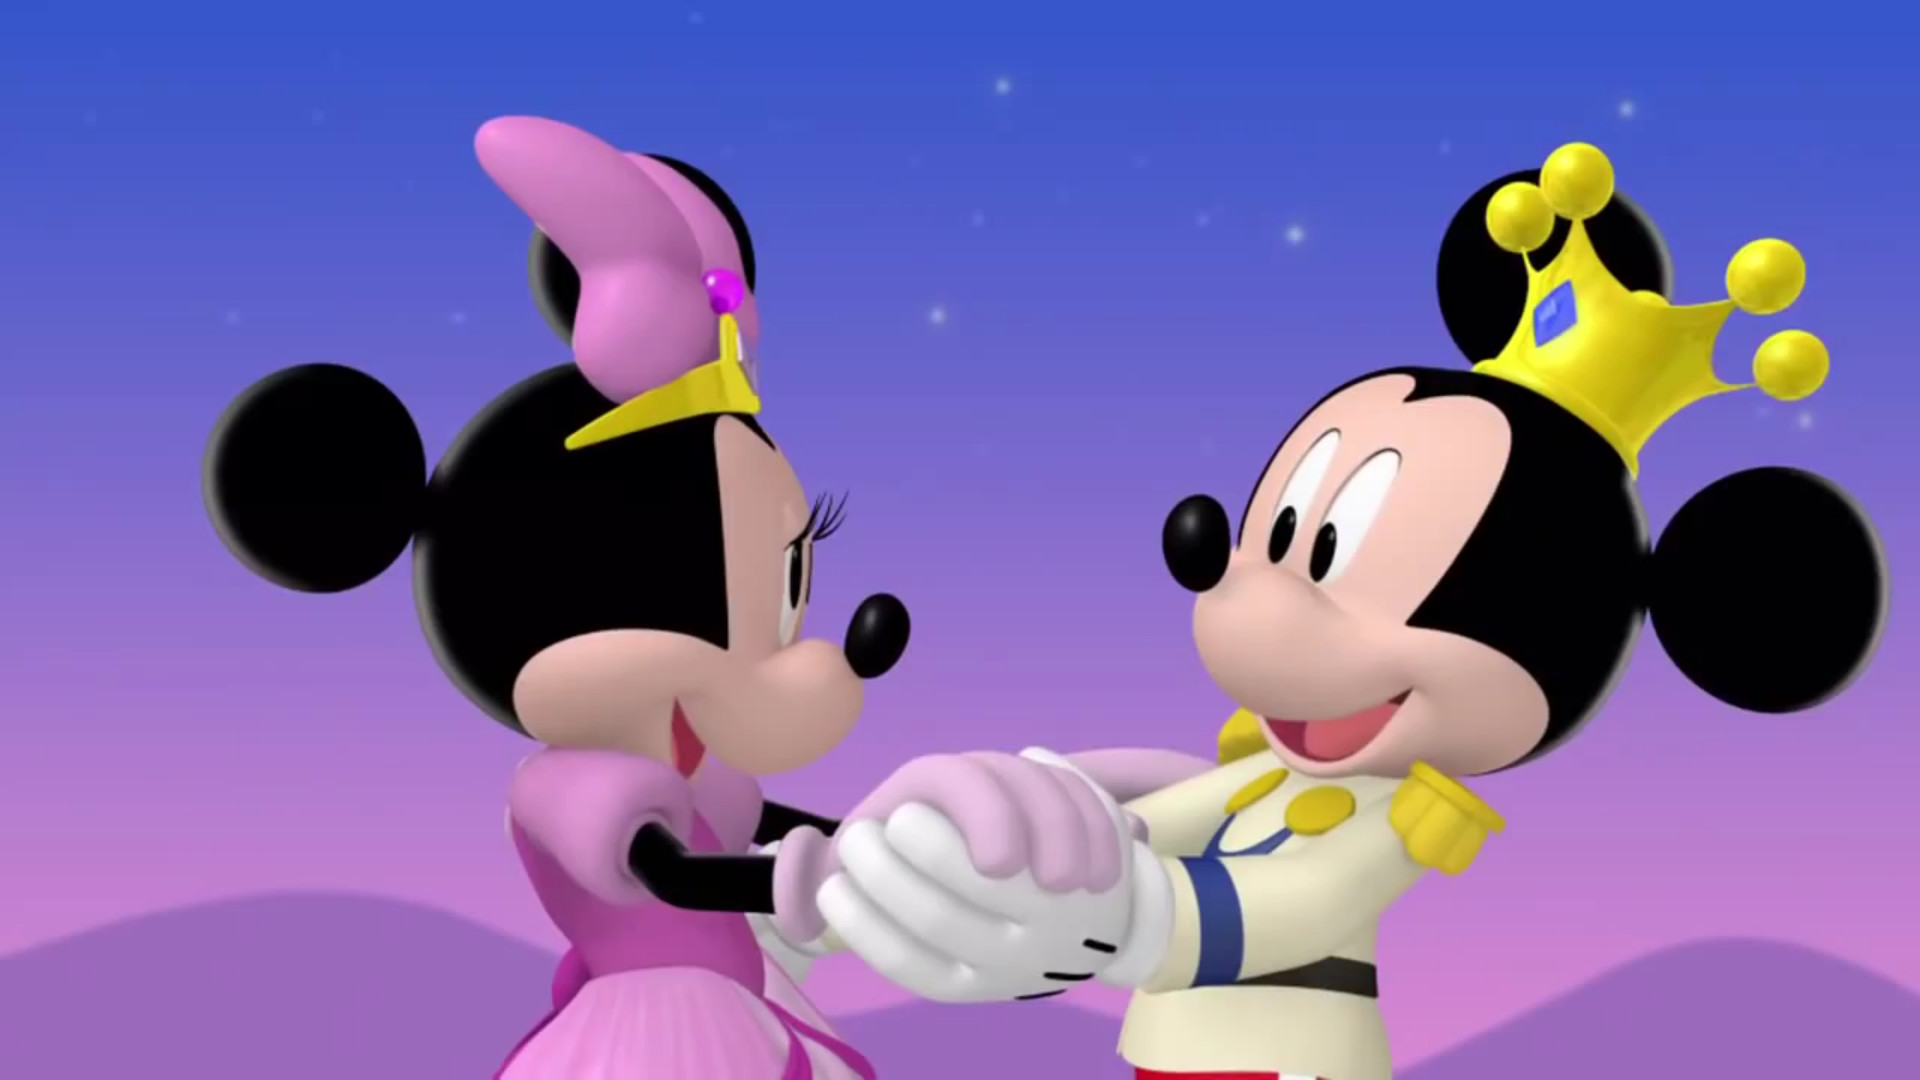 Mickey And Minnie Mouse Romantic Walk In The Park Love Couple DesktopHD WallpaperforMobilephonesTabletandPC2560x1600  Wallpapers13com